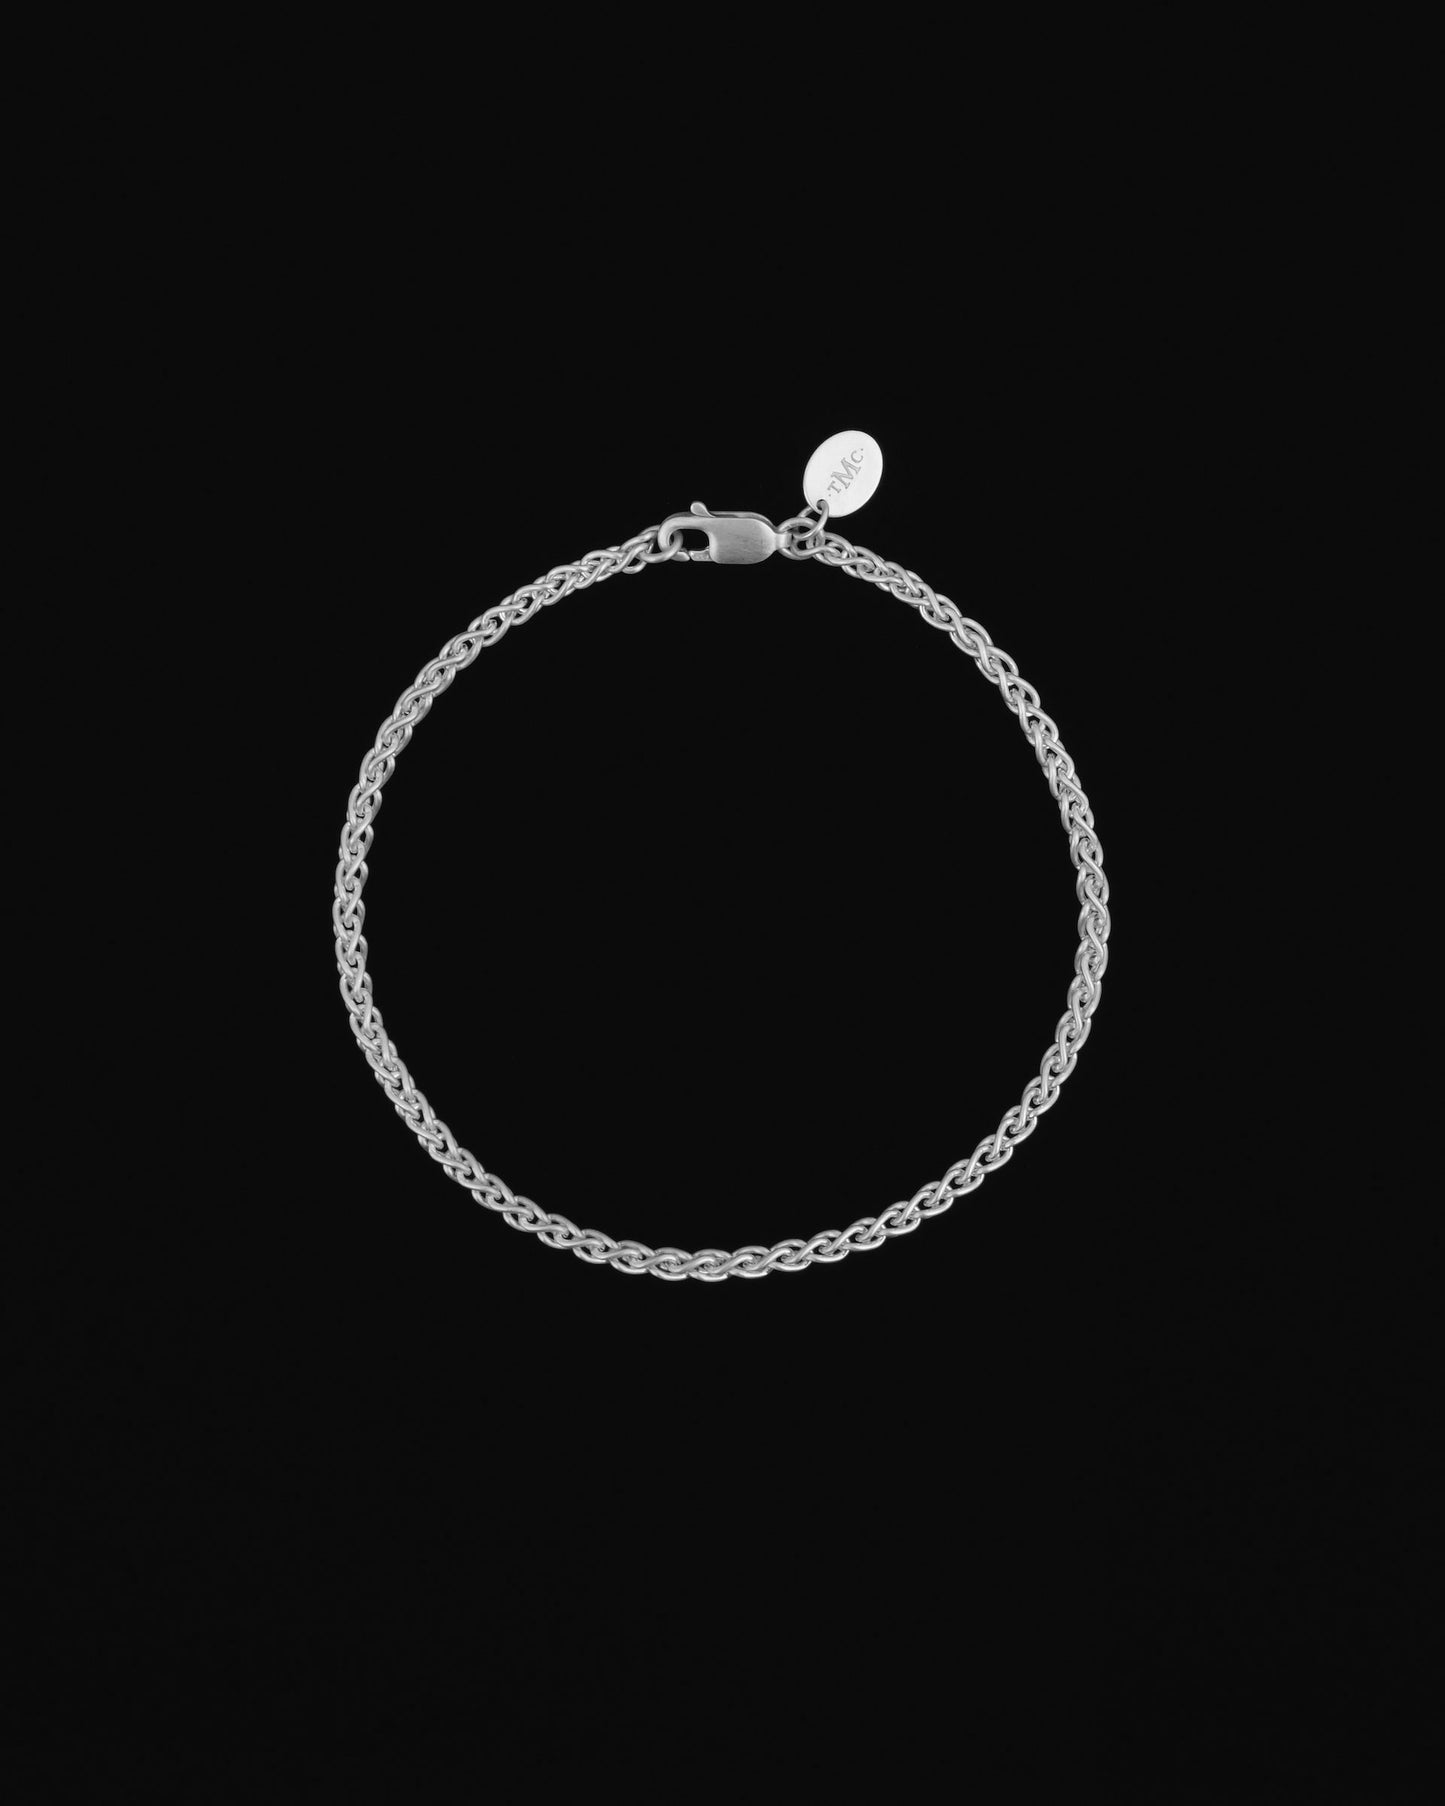 Tiana Marie Combes Riding Chain Bracelet in Sterling Silver.